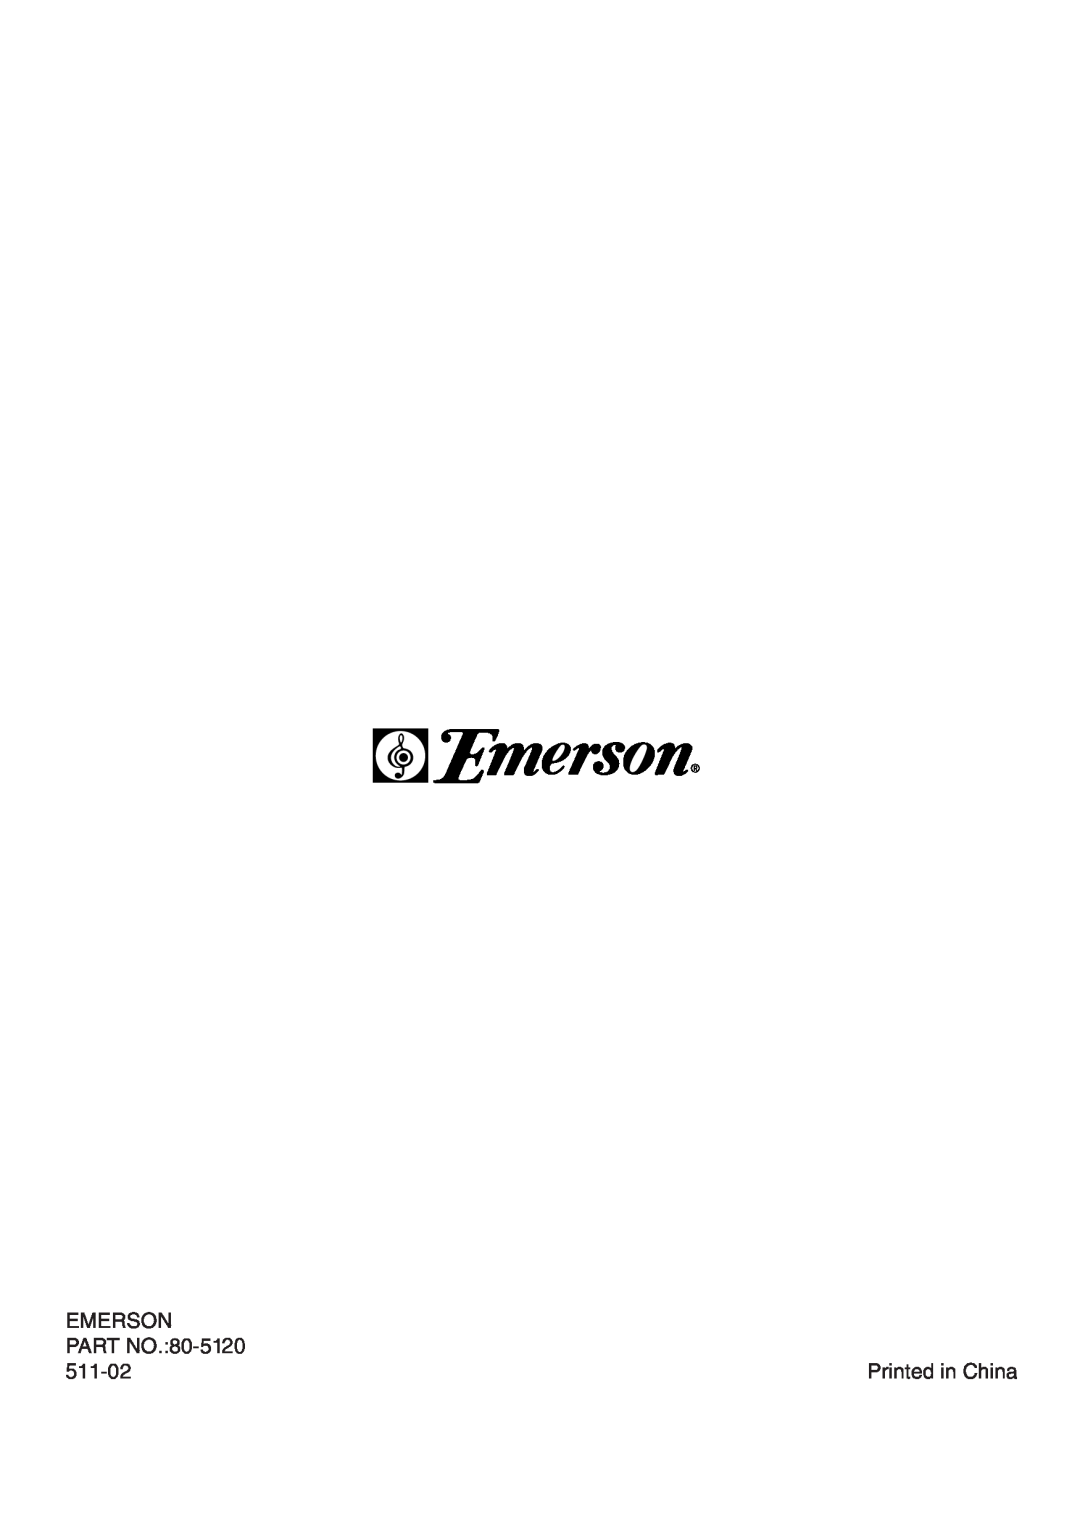 Emerson MW8991SB owner manual Emerson, PART NO.80-5120, 511-02, Printed in China 